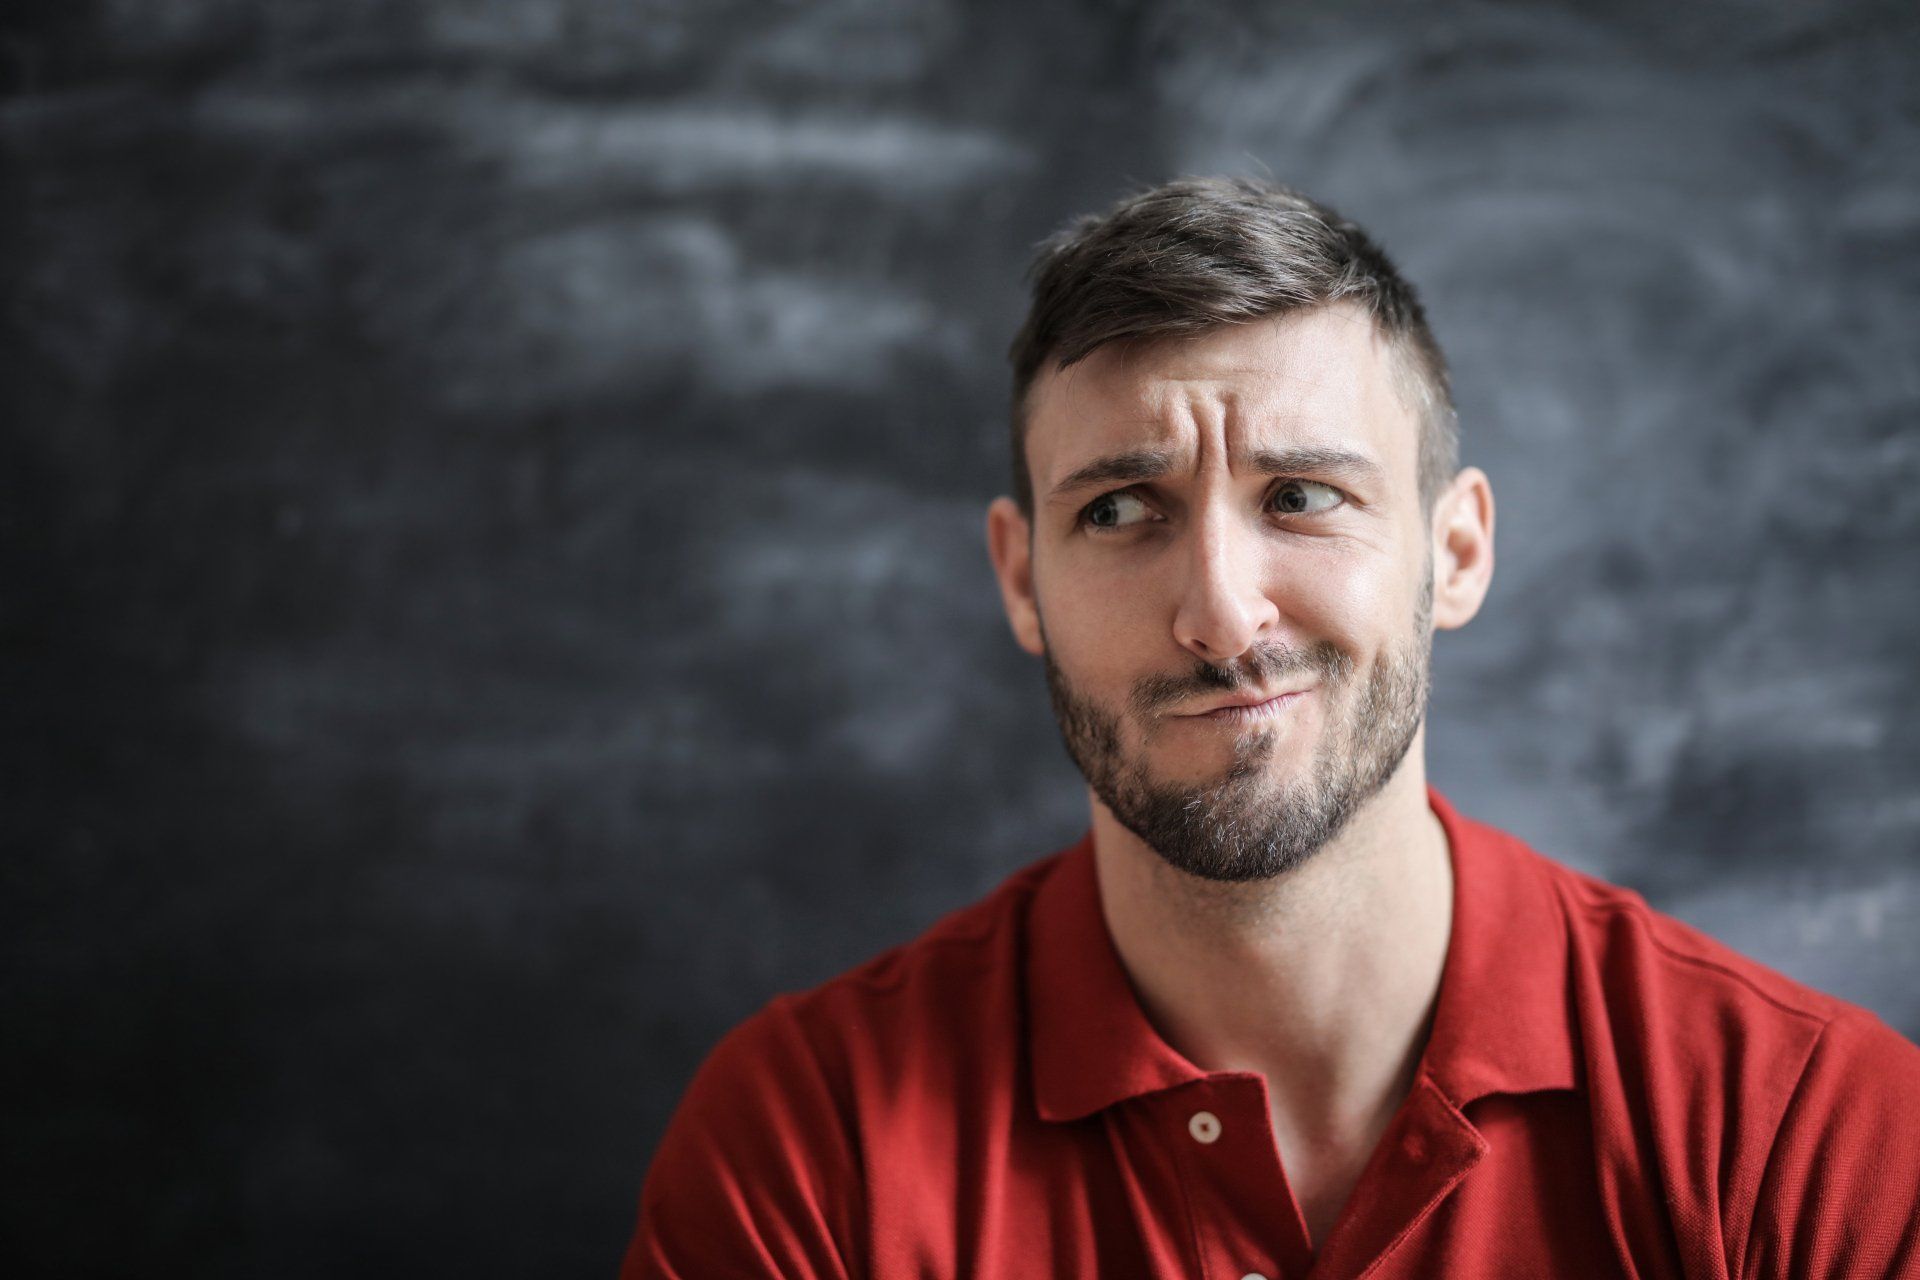 A man in a red shirt is making a funny face in front of a blackboard.